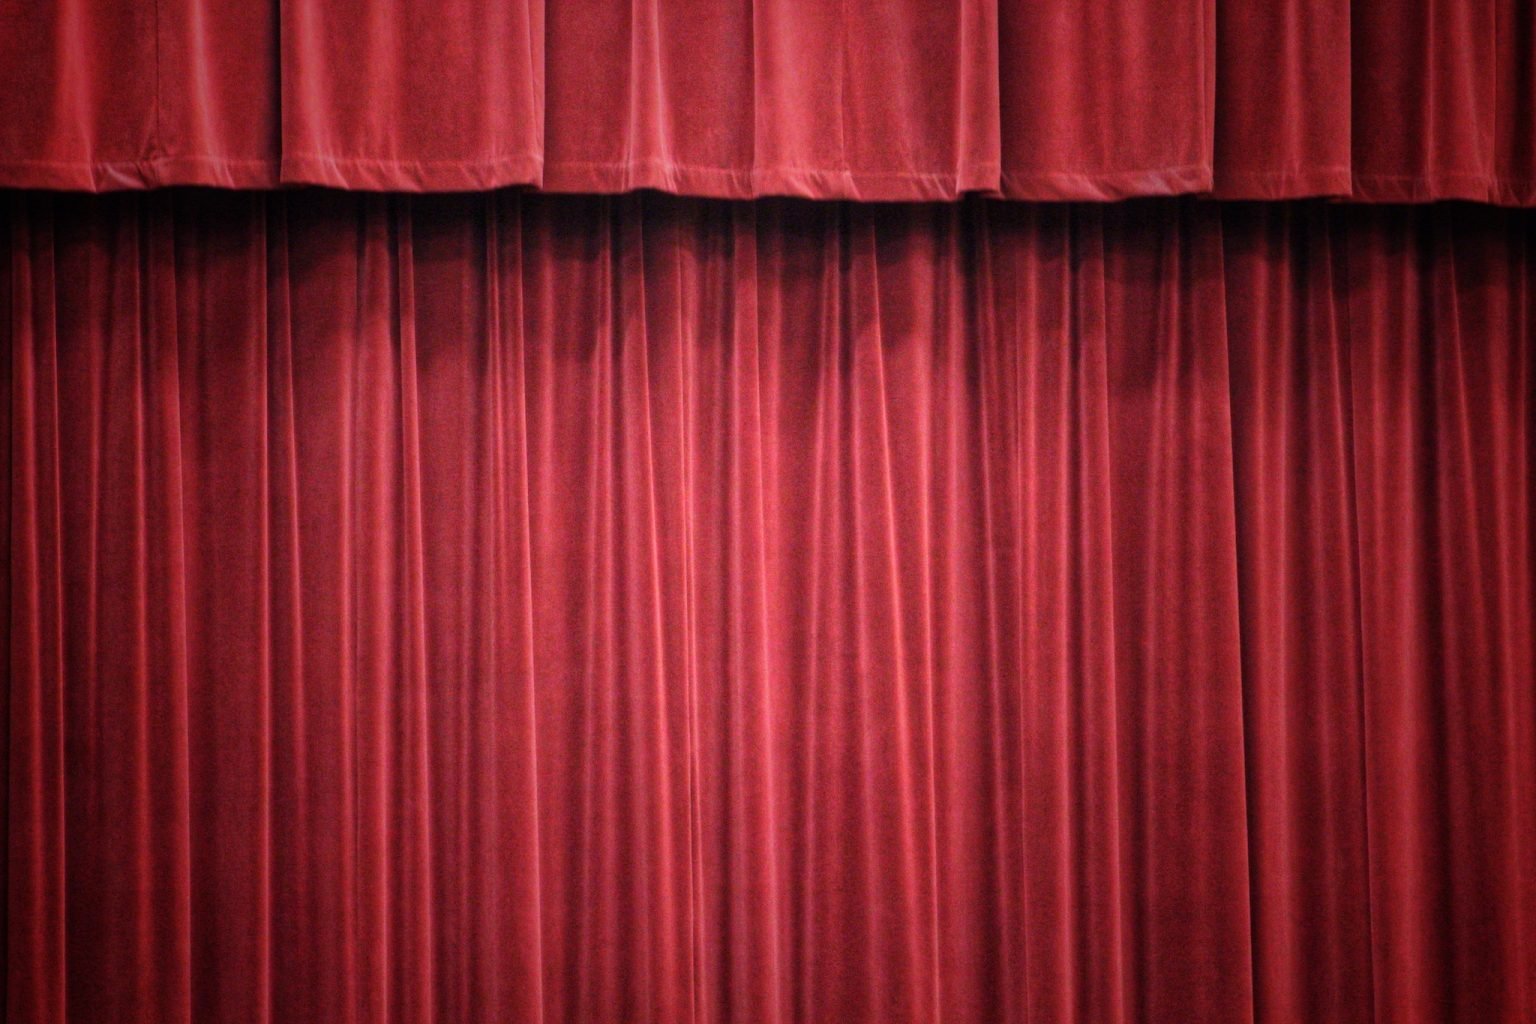 Stage Curtains in Red